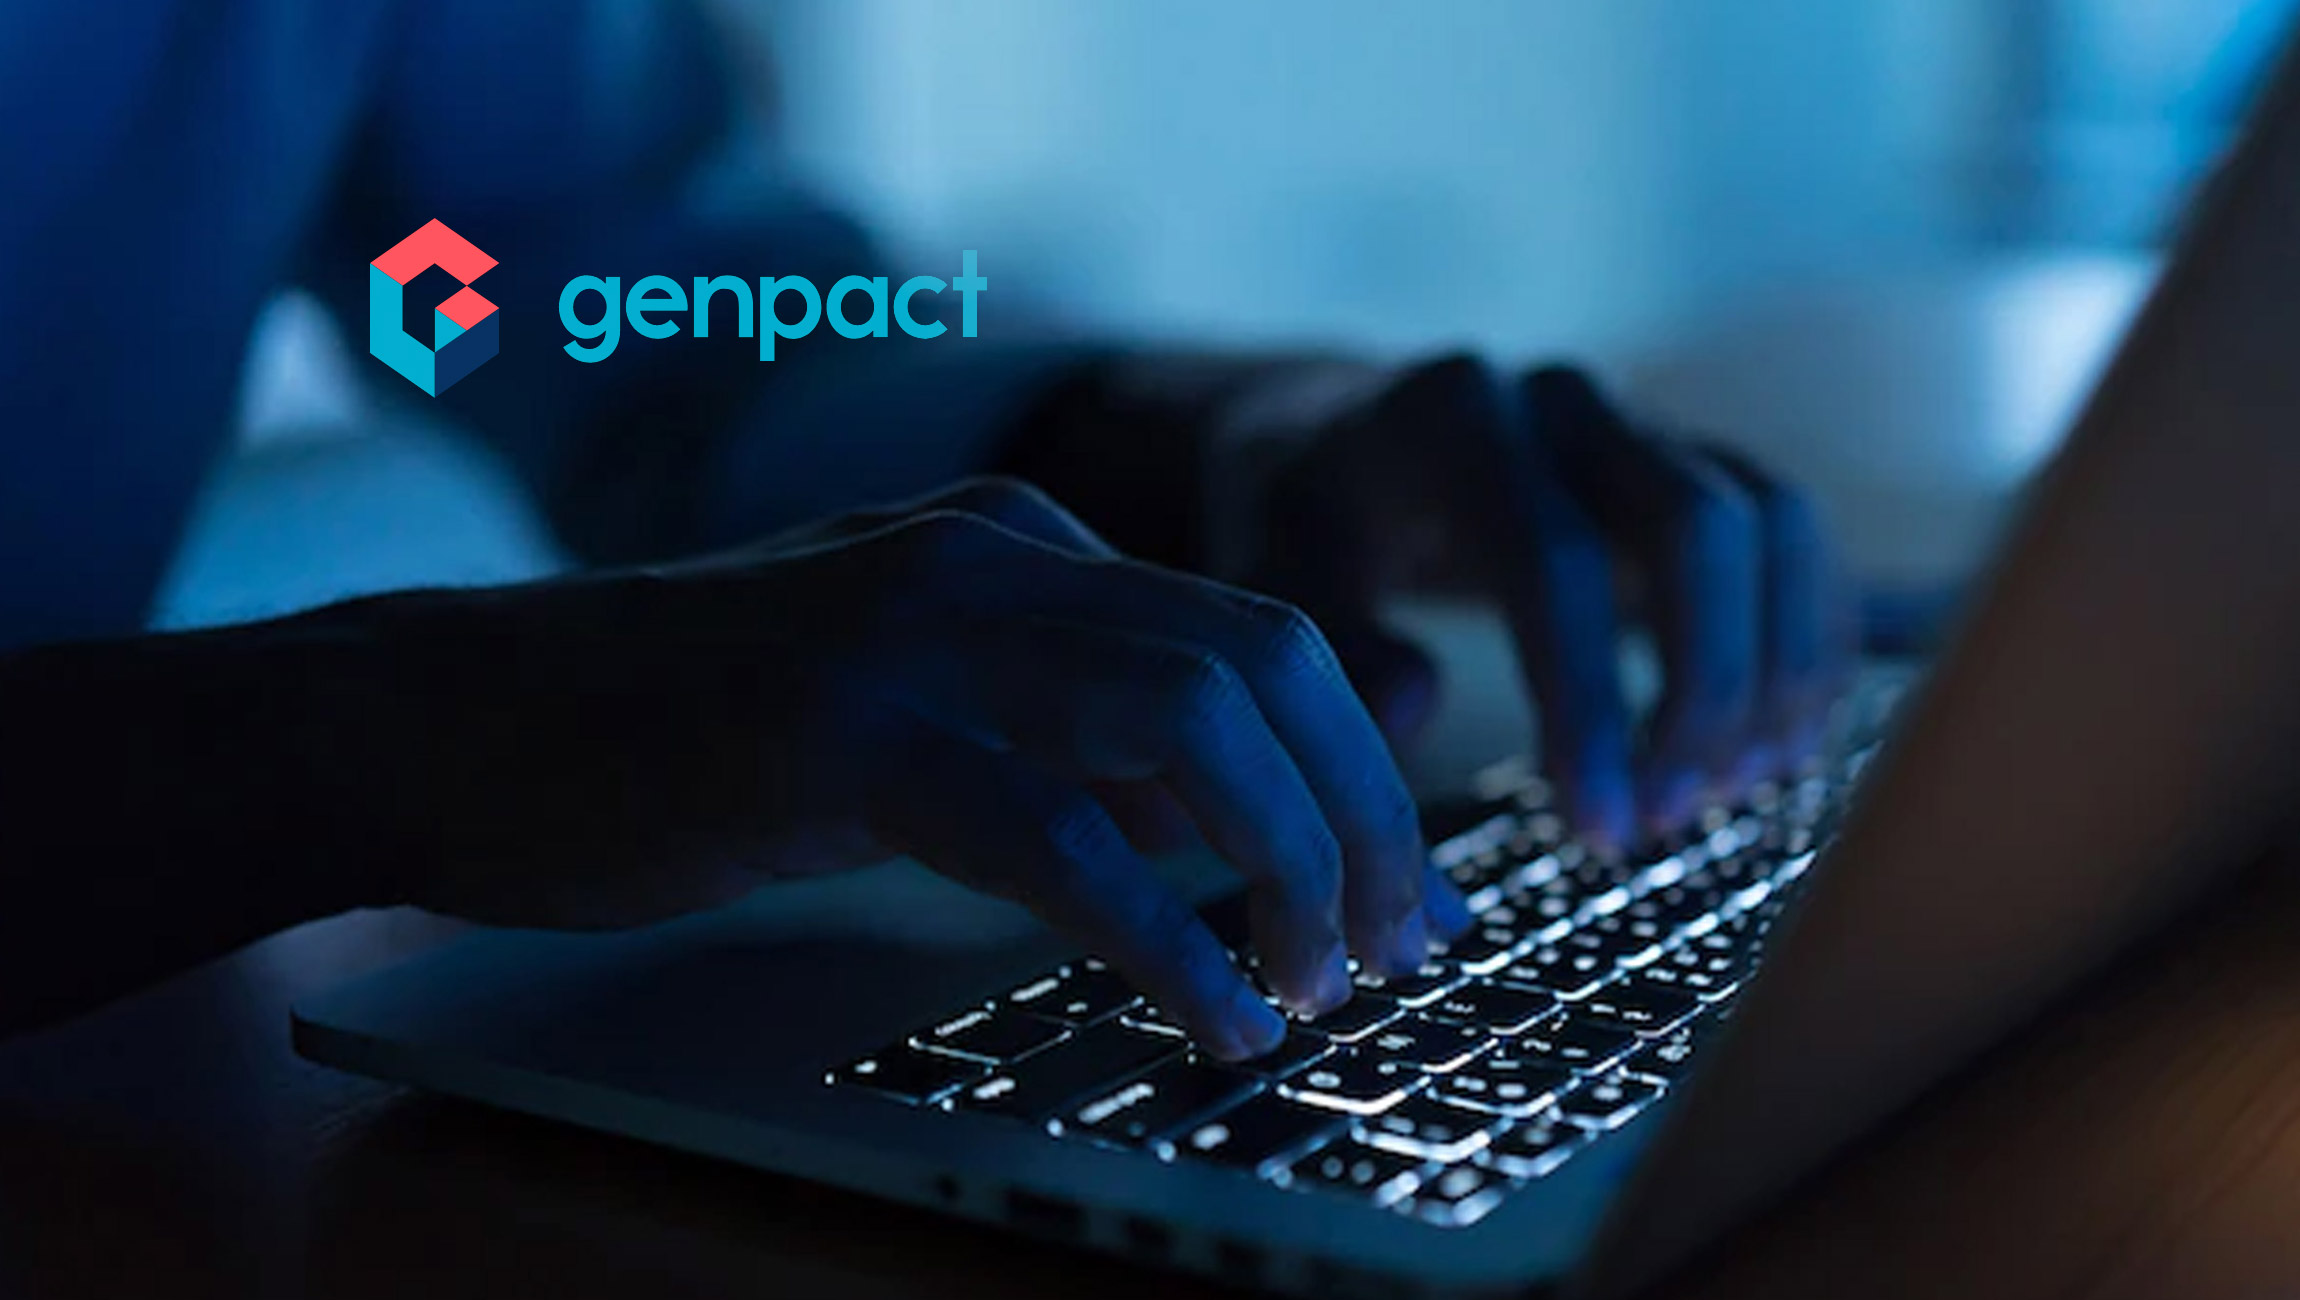 Genpact Research Reveals Only 8% of Enterprises Have Fully Modernized